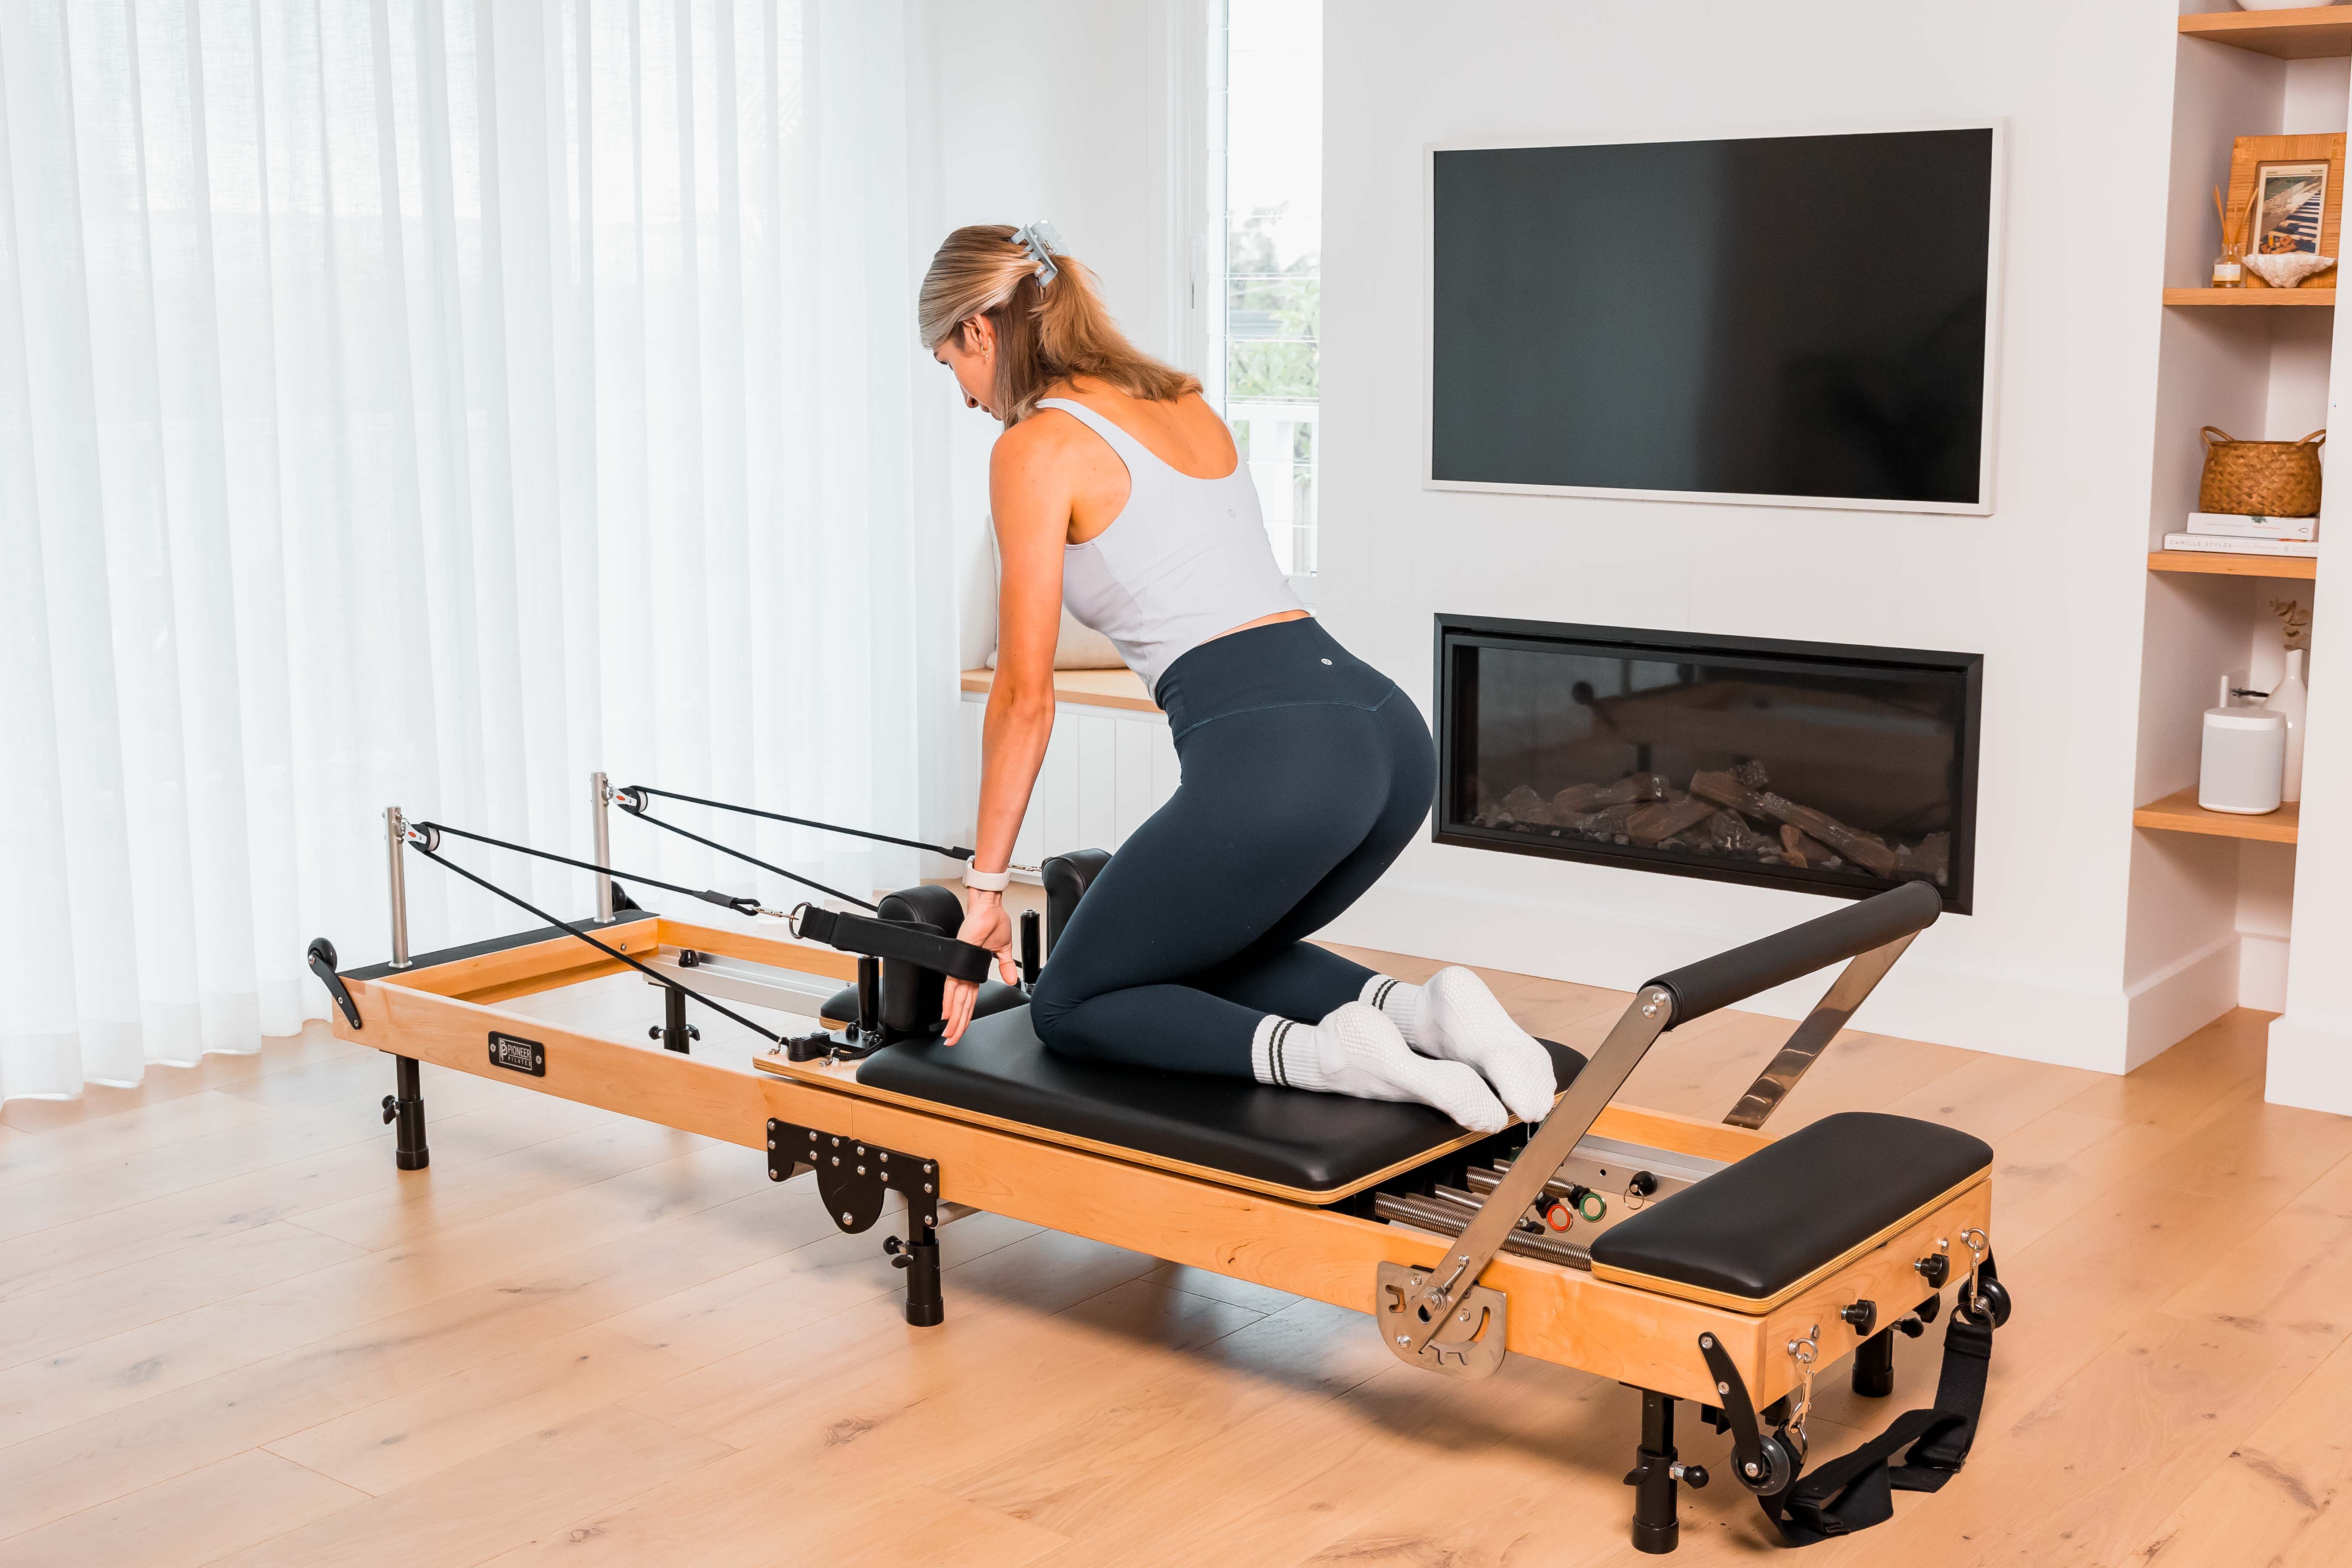 Buy Pilates Chairs Online  Pilates Wunda Chairs for Sale – Pilates  Reformers Plus